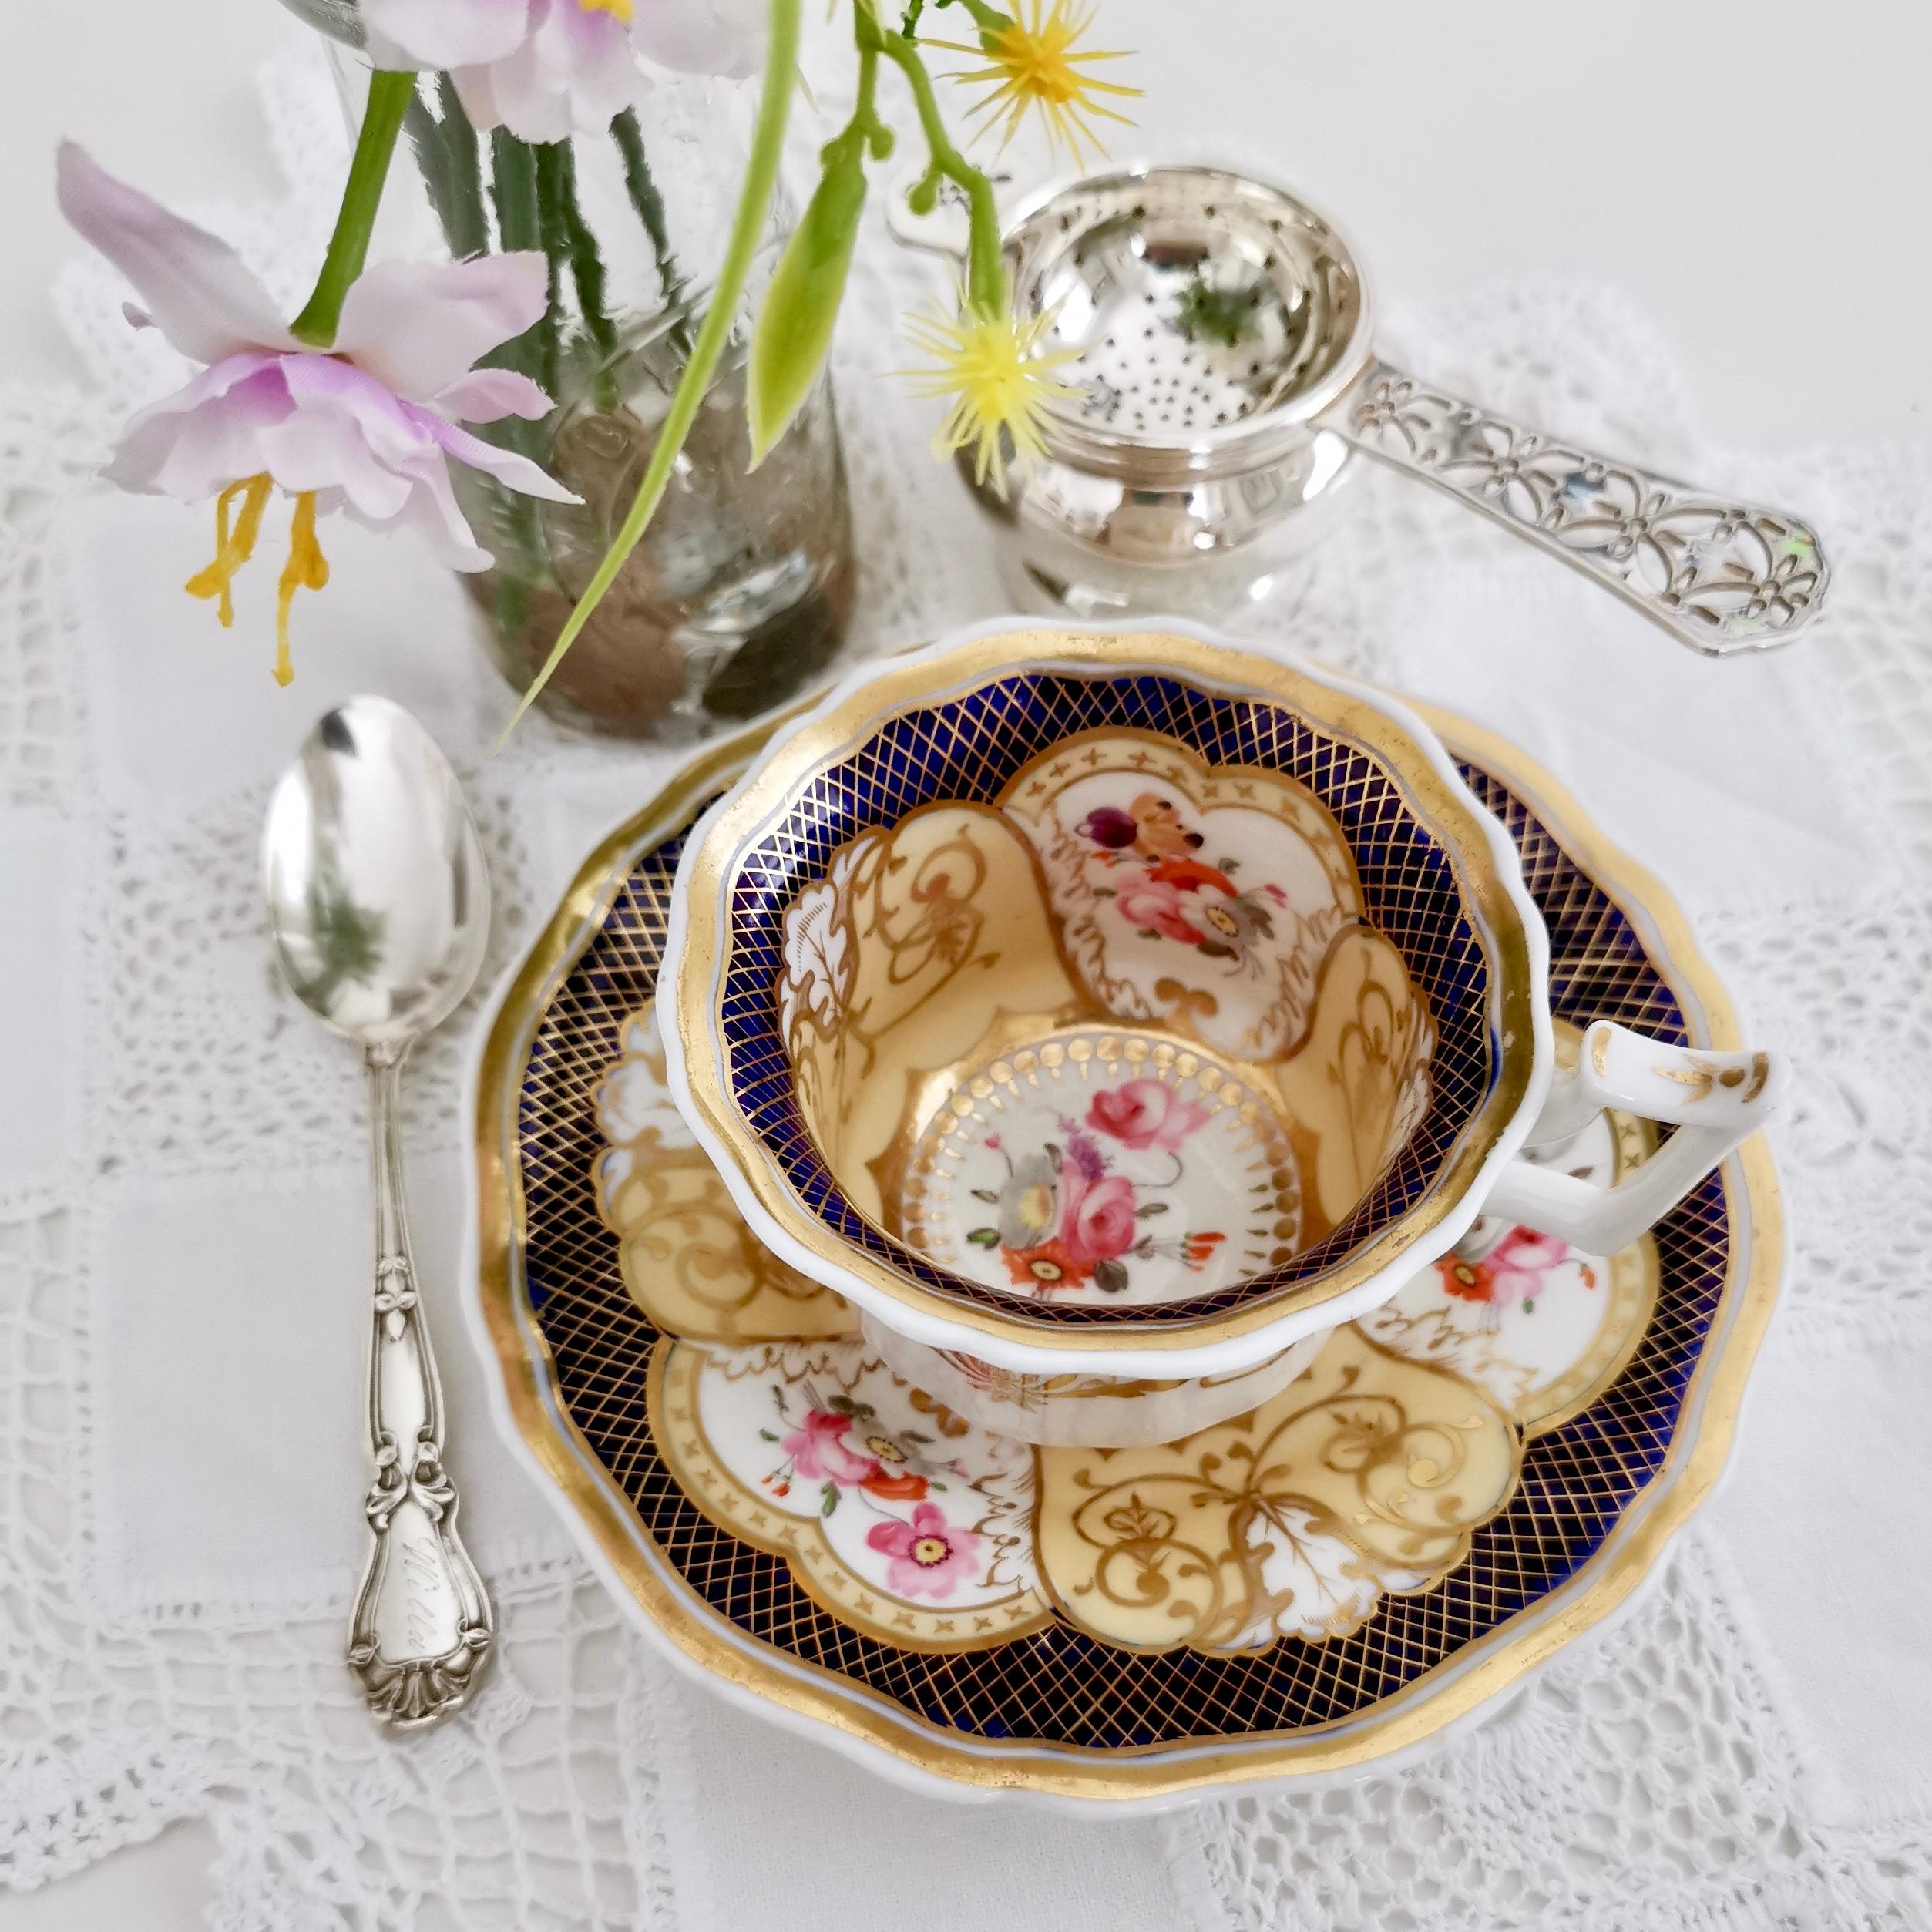 This is a Yates coffee cup and saucer made between 1820 and 1825, which is known as the Regency period.

The Yates factory was operative between 1784 and 1836 and was mostly based in Shelton, Staffordshire. It worked alongside other more famous